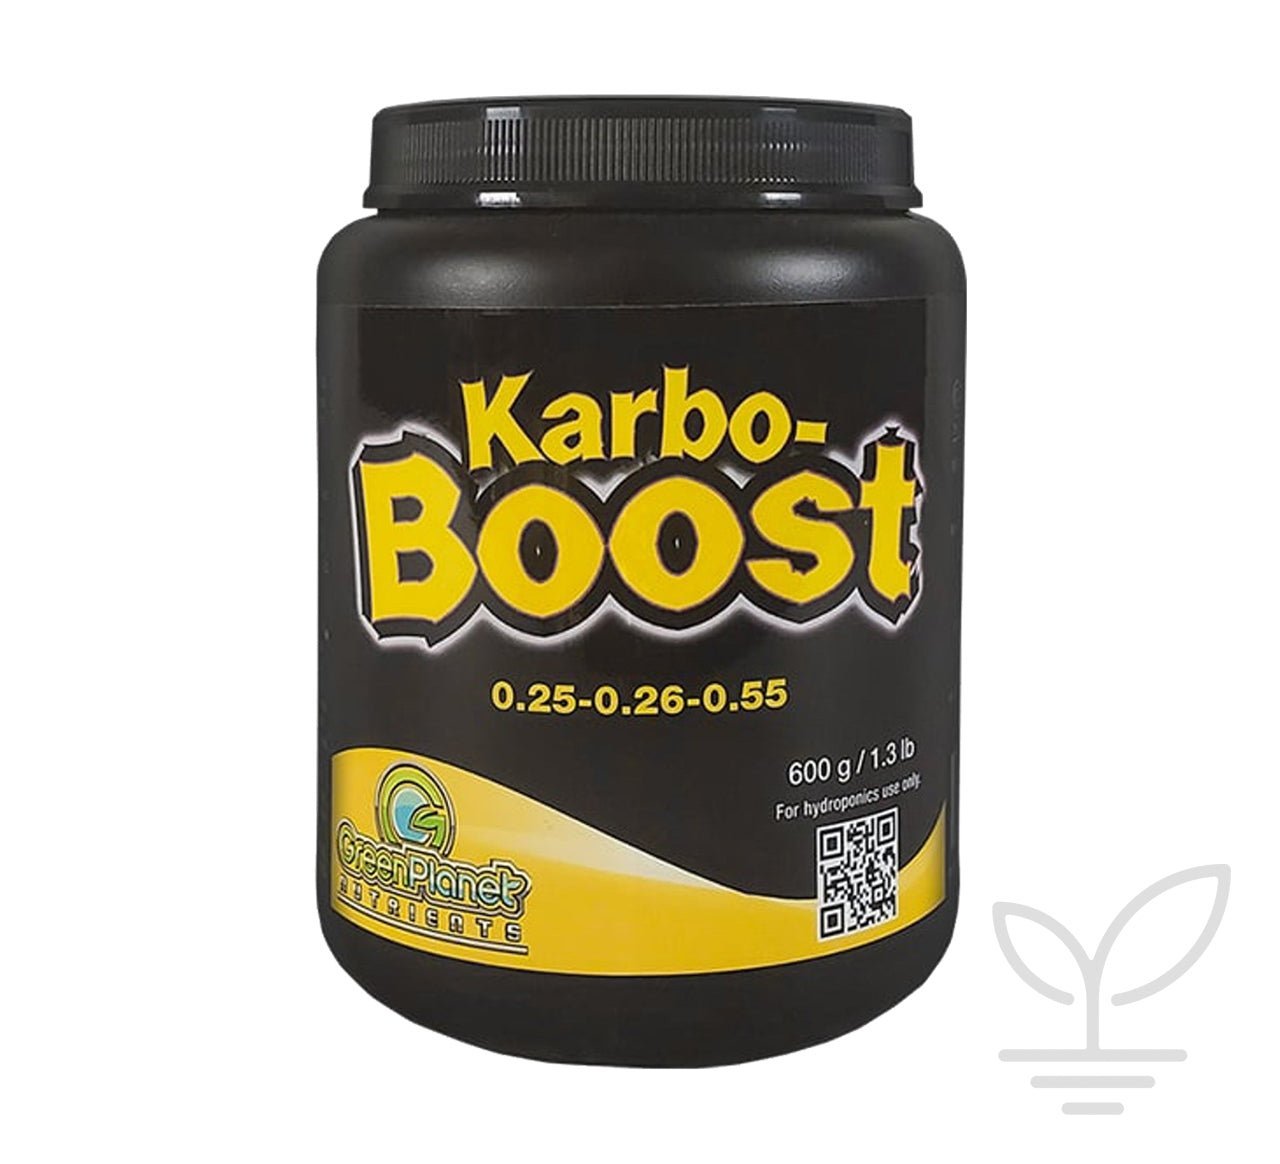 Green Planet Karbo Boost - 600g